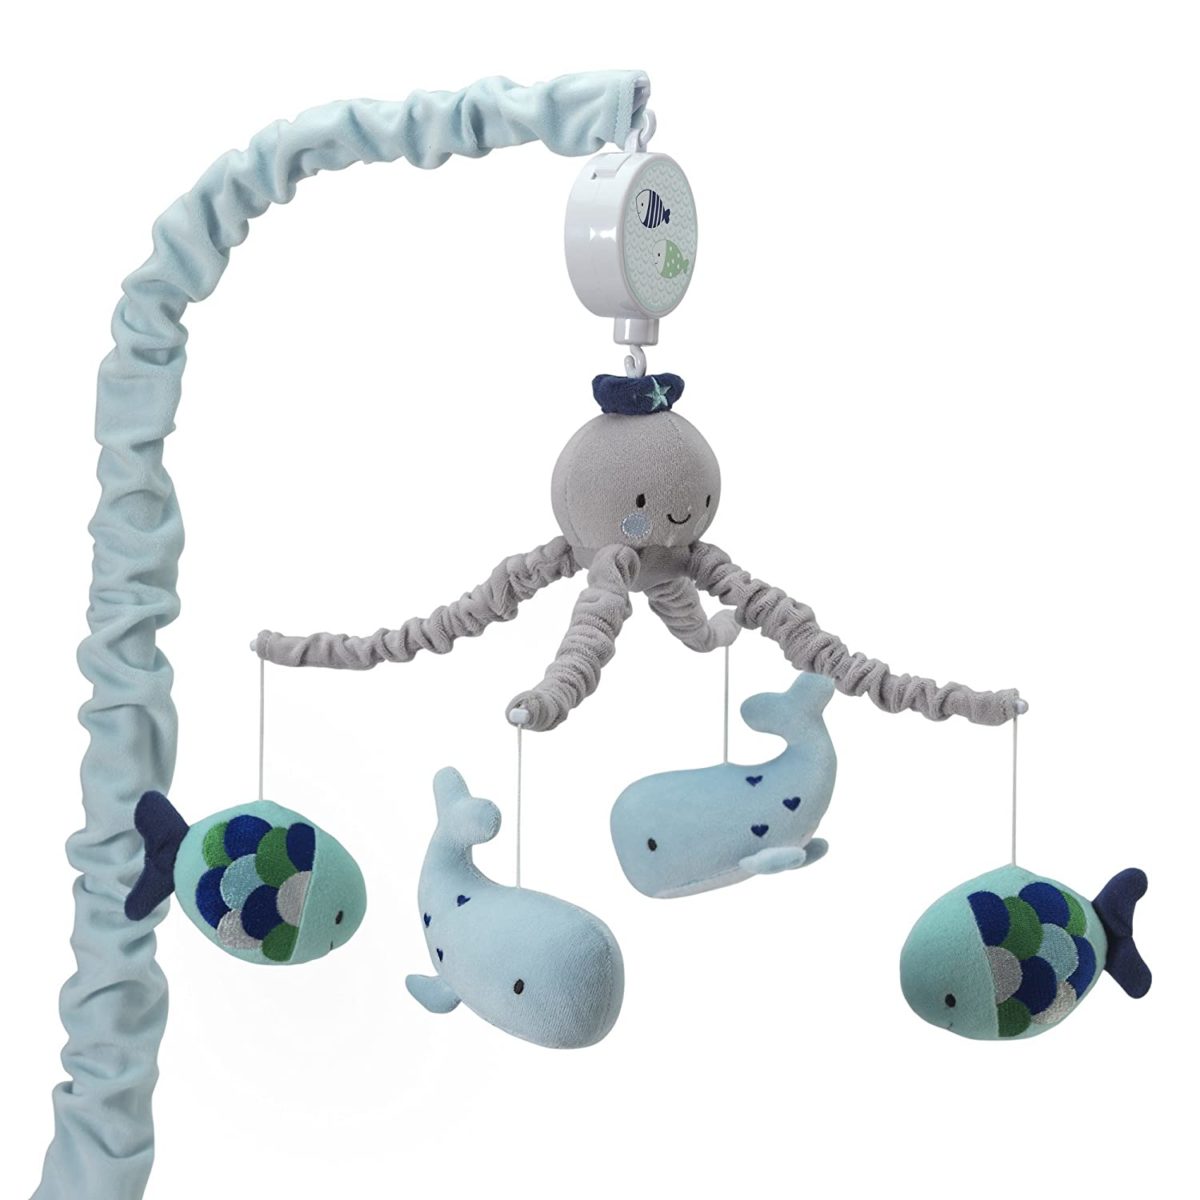 Baby Mobile for Cribs That Add a Touch of Whimsy